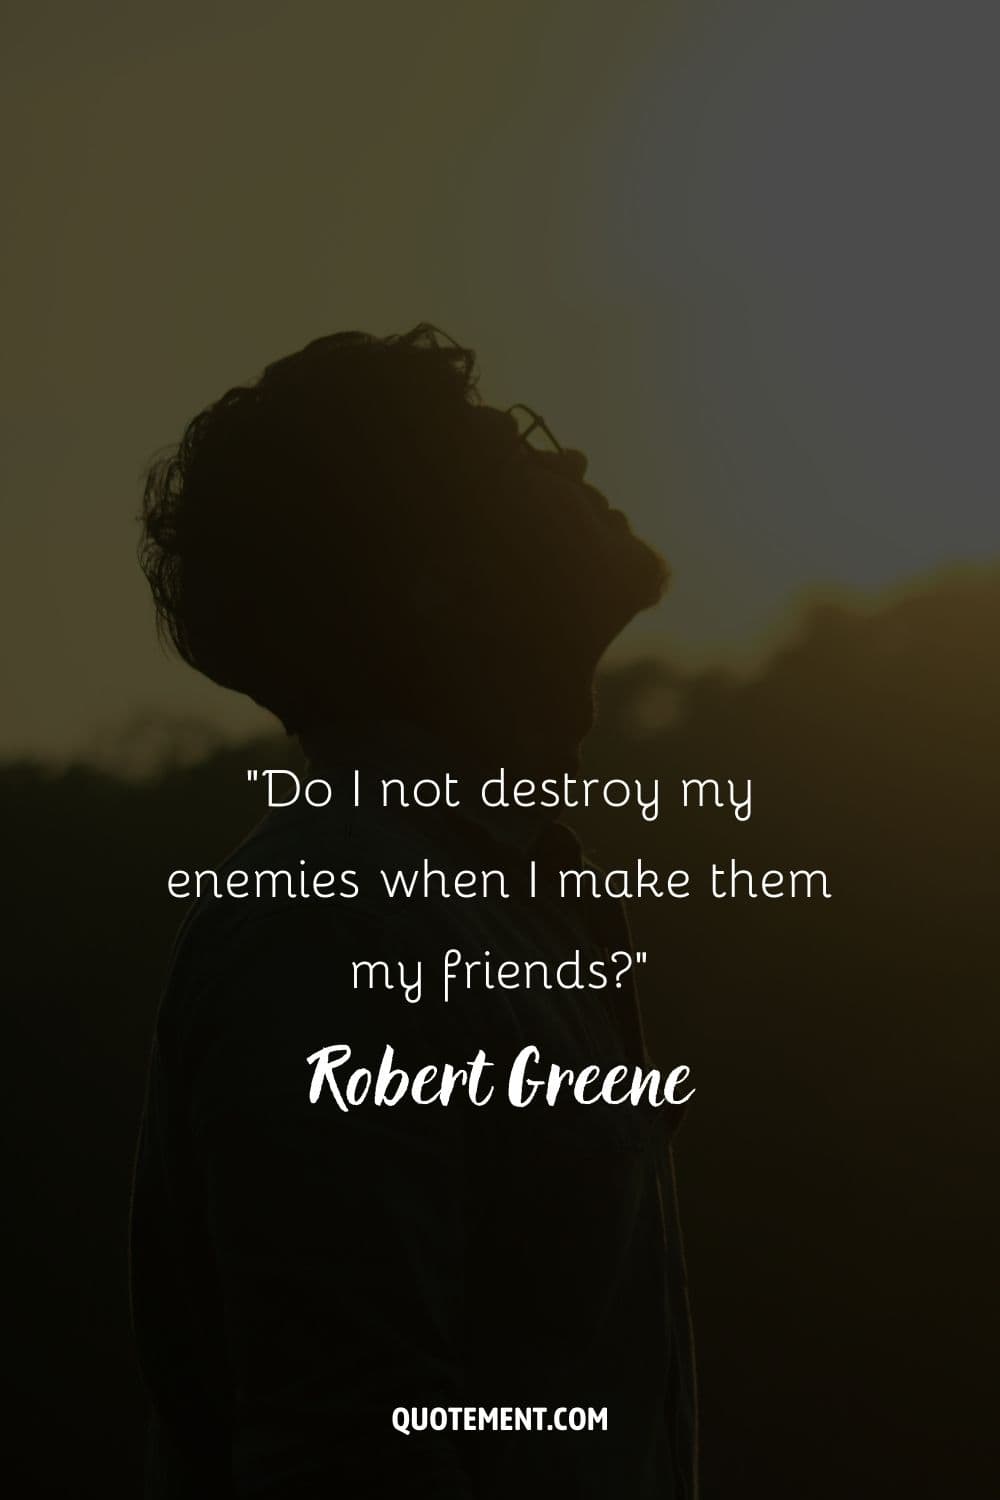 “Do I not destroy my enemies when I make them my friends” ― Robert Greene, The 48 Laws of Power